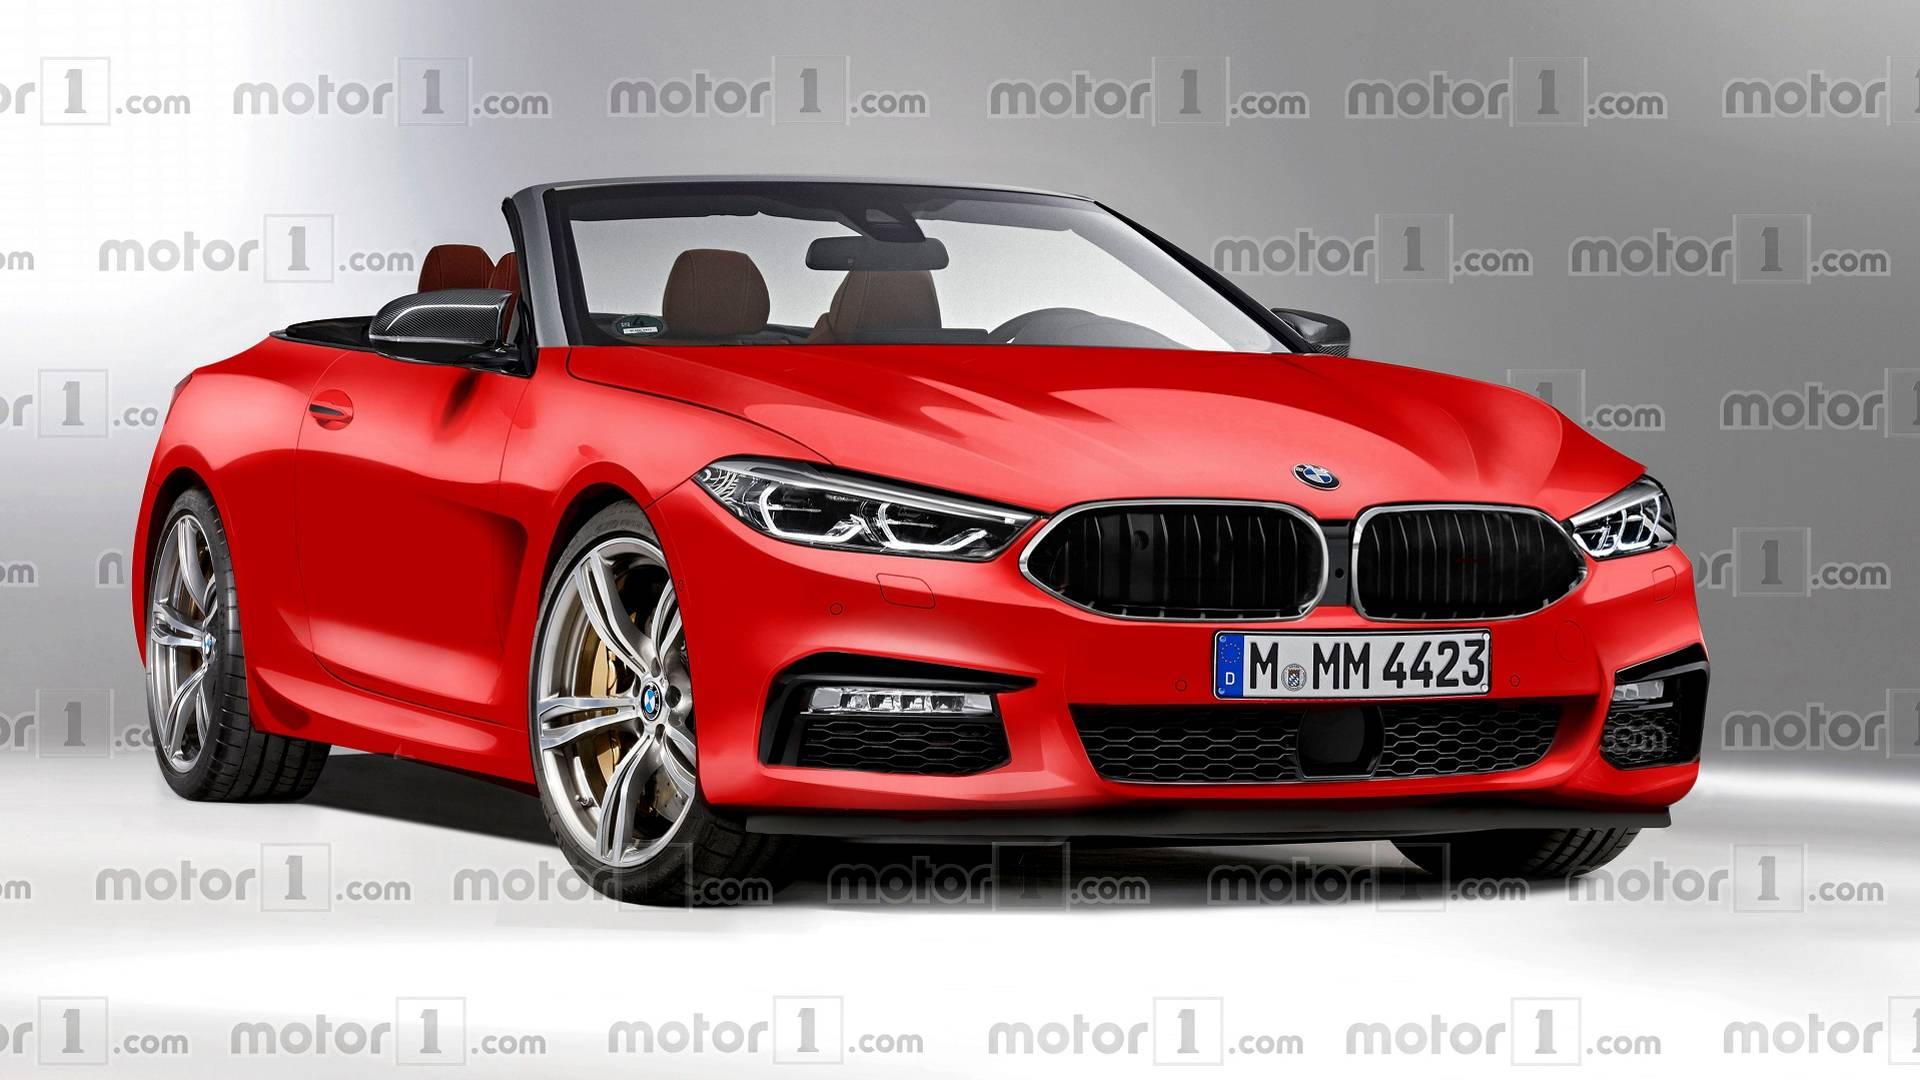 Rendering Reveals What A BMW 8 Series Convertible Could Look Like